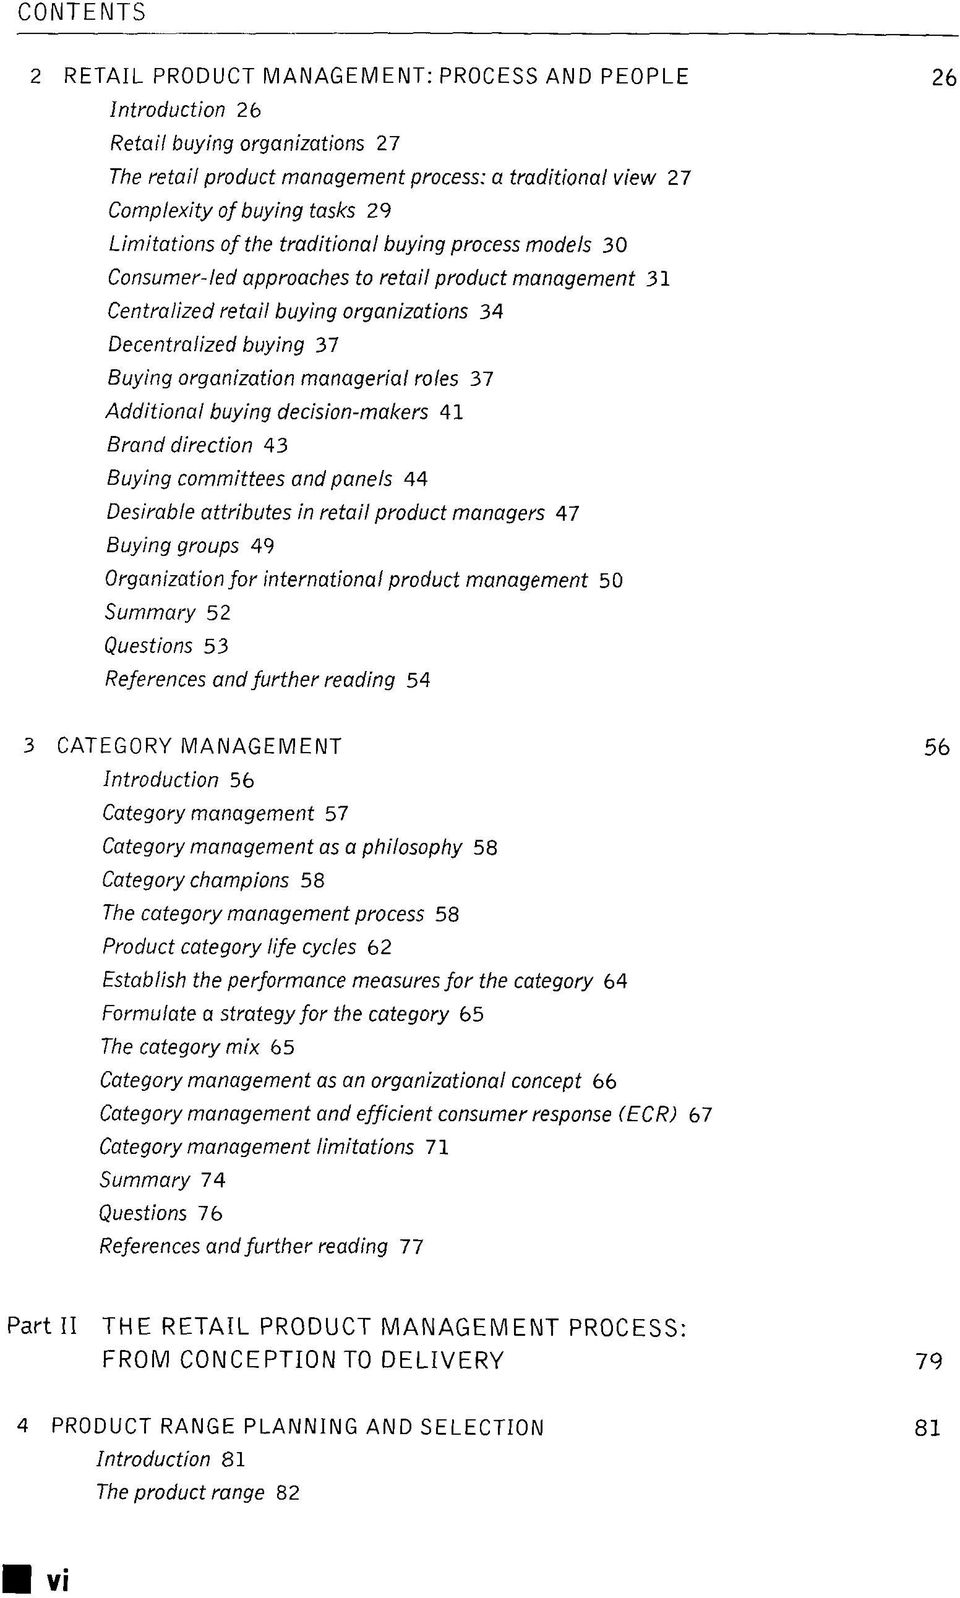 managerial rotes 37 Additional buying decision-makers 41 Brand direction 43 Buying committees and panels 44 Desirable attributes in retail product managers 47 Buying groups 49 Organization for